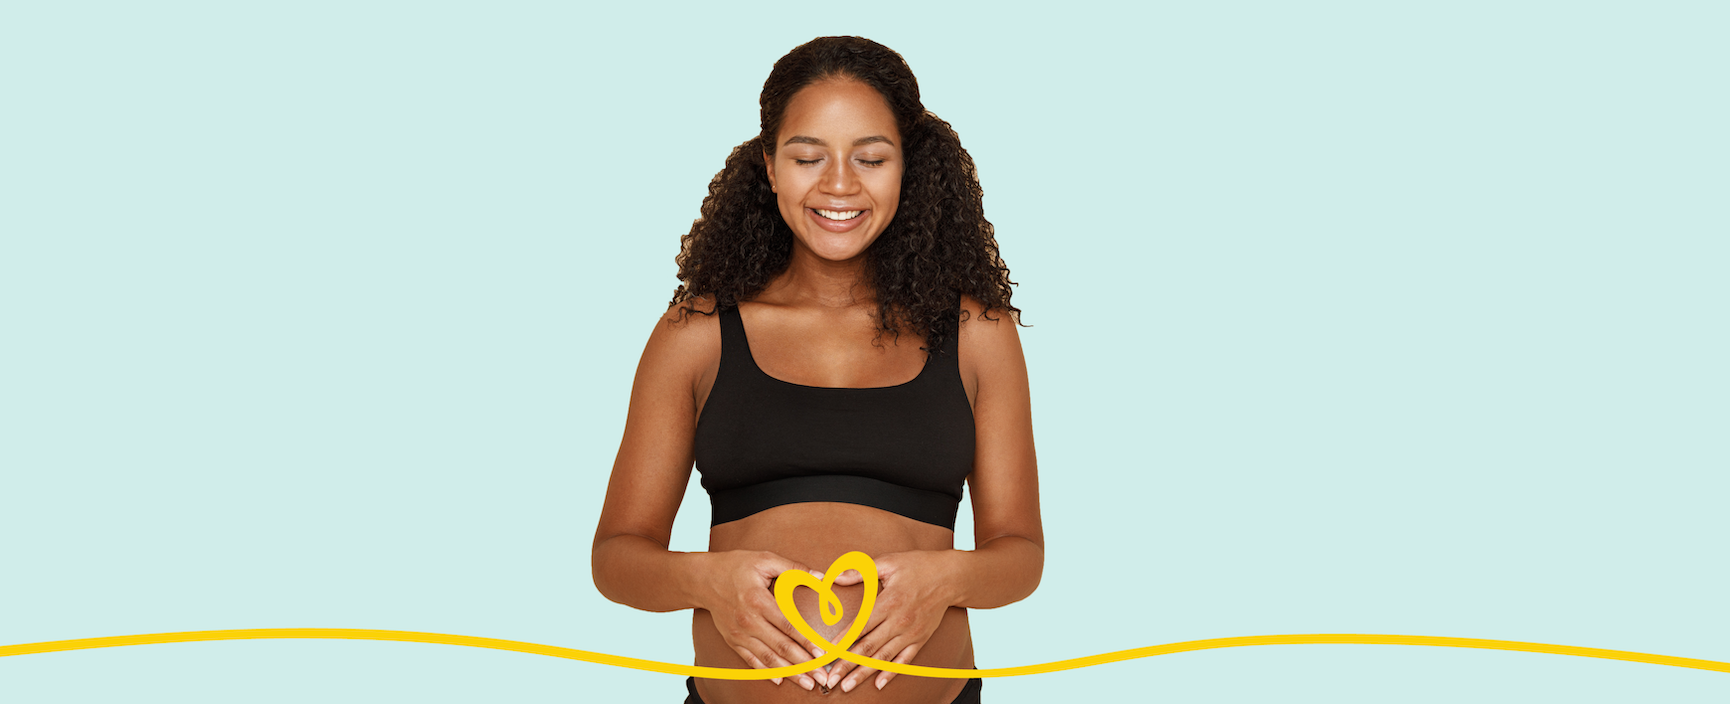 A Black, pregnant woman places her hands over her stomach with a swooping Pampers logo in frame